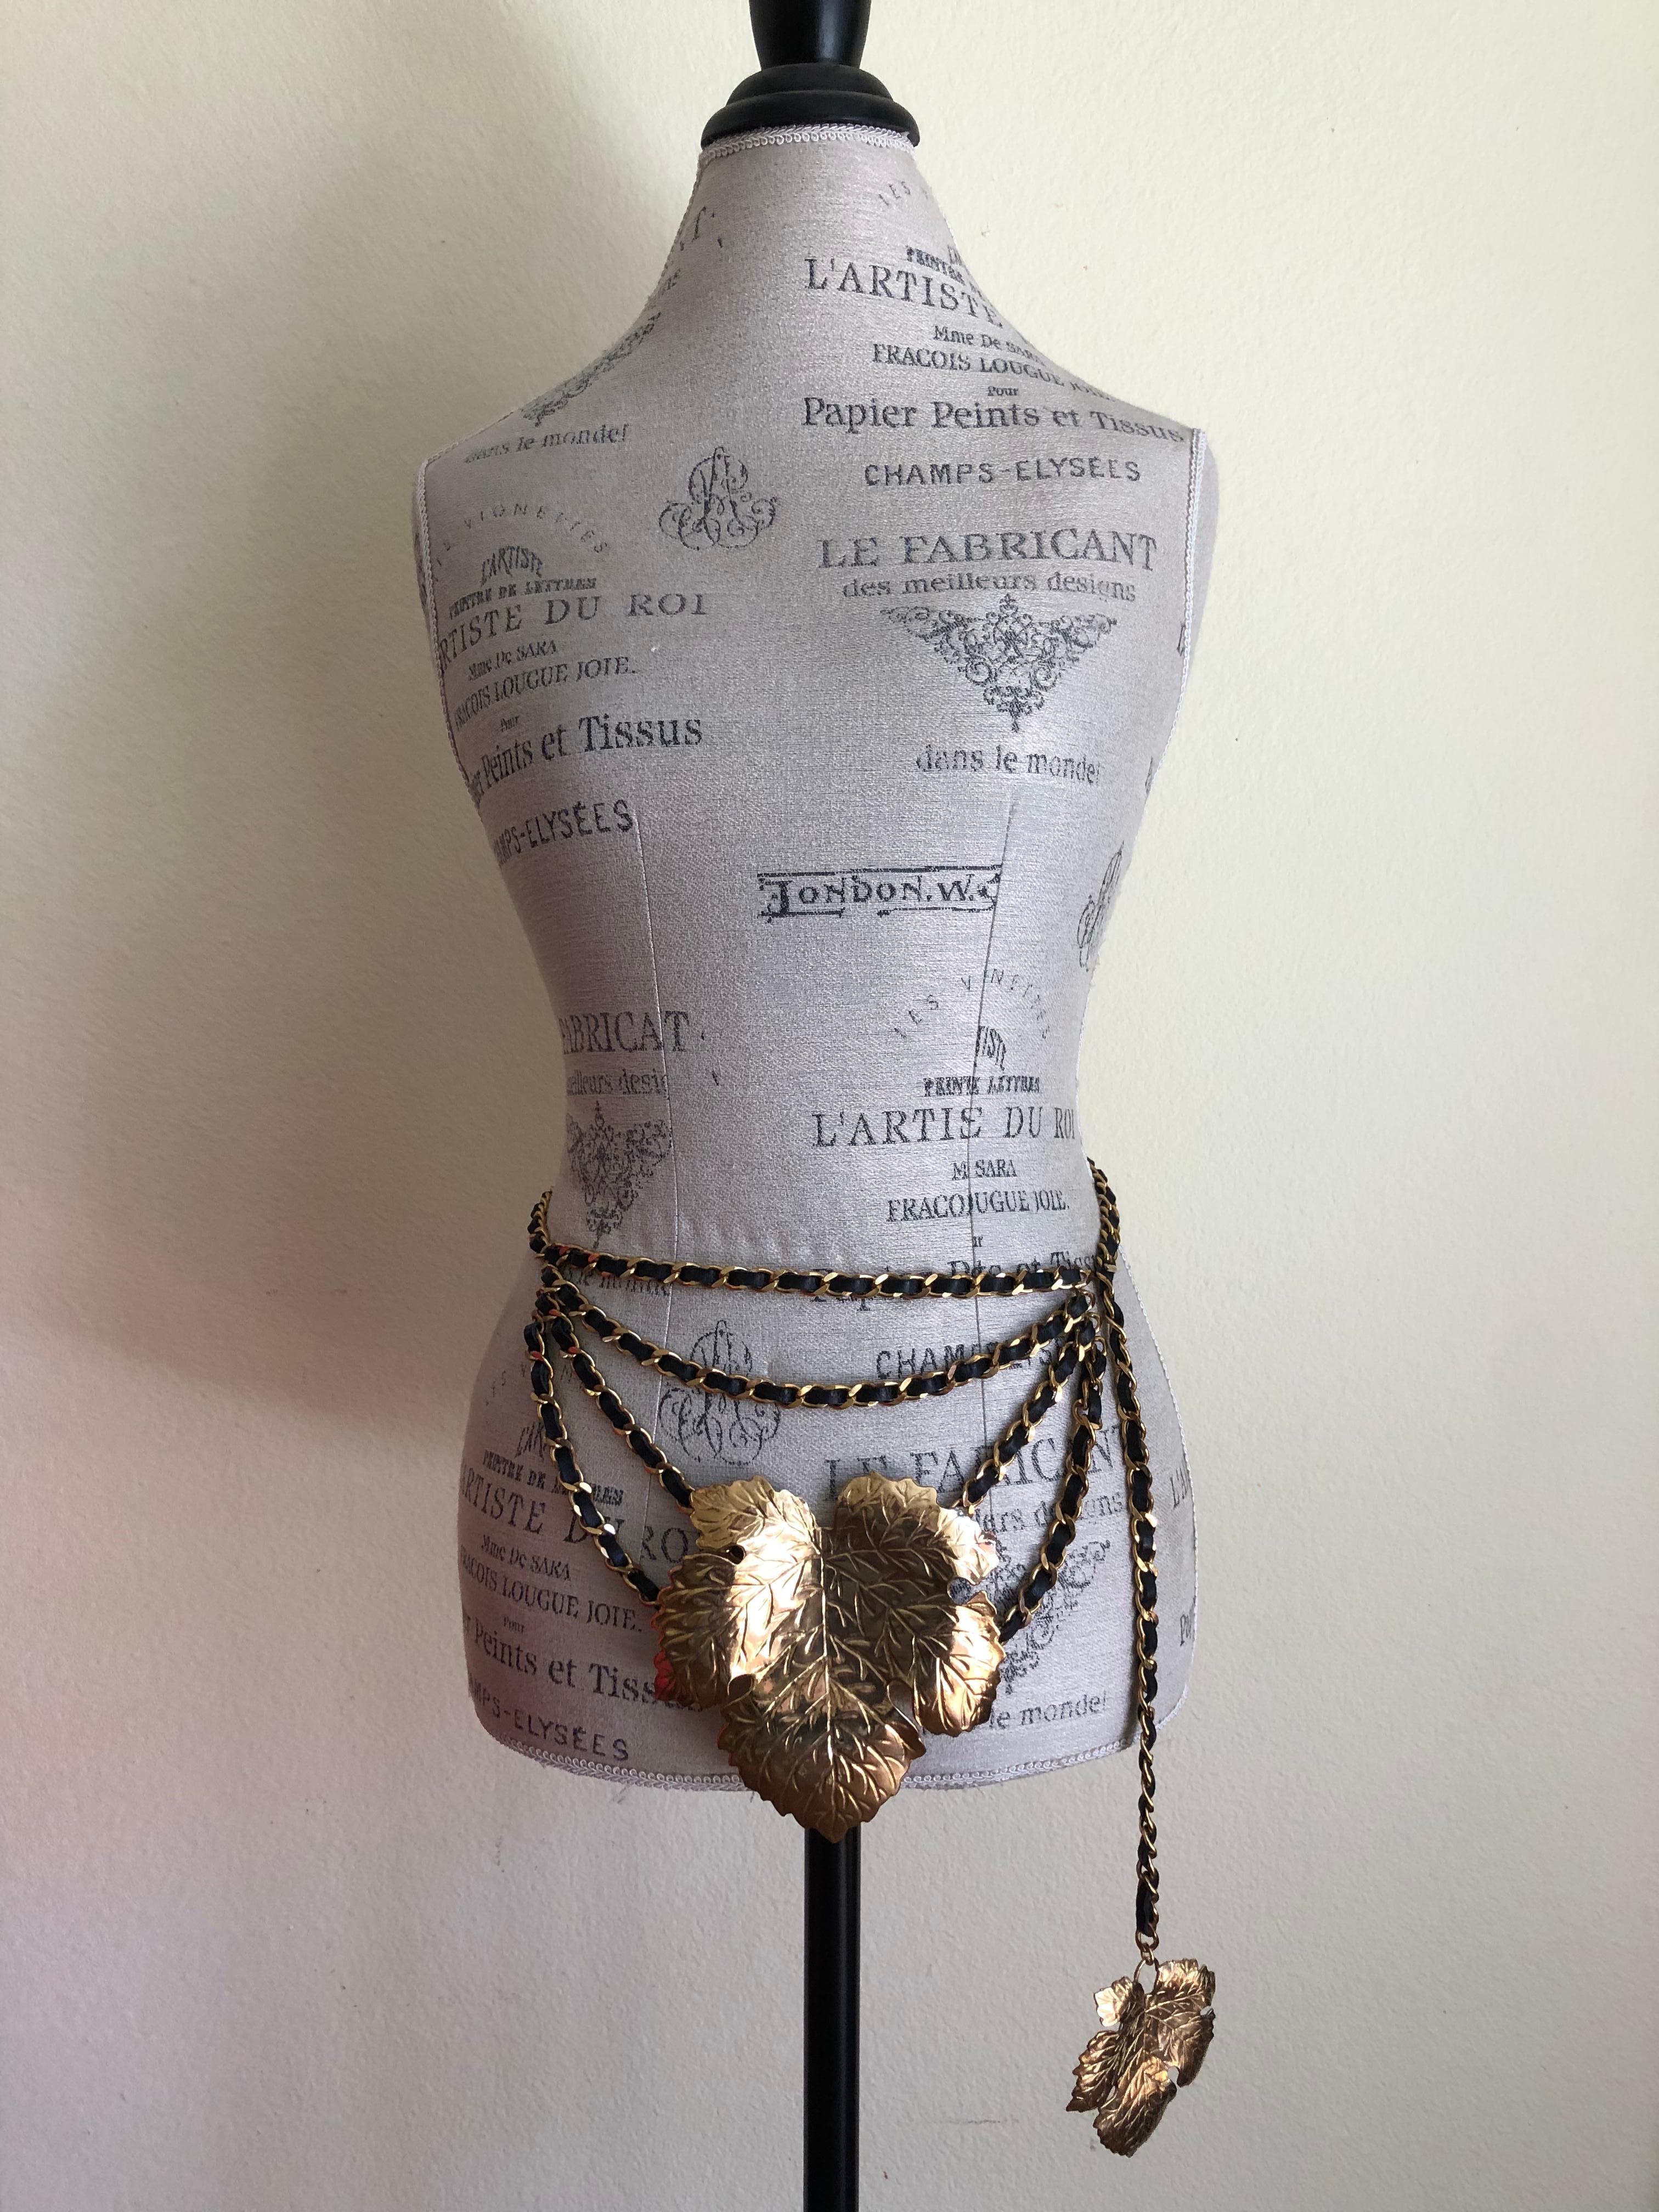 Vintage Chanel chain link fig leaf belt (circa 1991) designed by Karl Lagerfeld.  

Multiple layered leather chain belt adorned with two 24-karat gold plated fig leaves from Chanel's spring 1991 collection, designed by Karl Lagerfeld. The larger fig